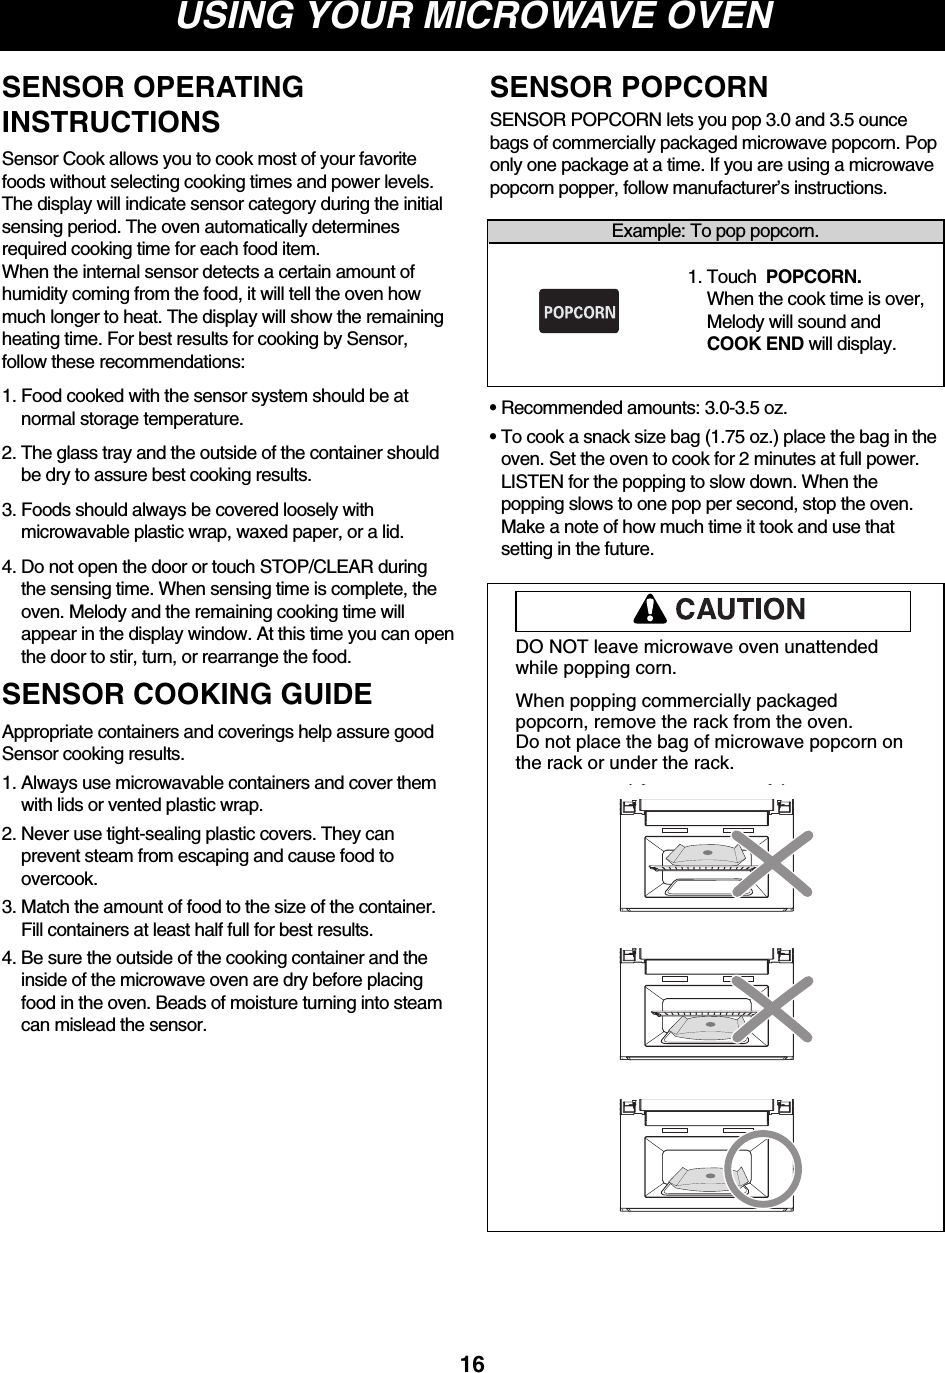 USING YOUR MICROWAVE OVEN16DO NOT leave microwave oven unattendedwhile popping corn.When popping commercially packagedpopcorn, remove the rack from the oven. Do not place the bag of microwave popcorn onthe rack or under the rack.Example: To pop popcorn.1. Touch  POPCORN. When the cook time is over,Melody will sound andCOOK END will display.SENSOR POPCORN lets you pop 3.0 and 3.5 ouncebags of commercially packaged microwave popcorn. Poponly one package at a time. If you are using a microwavepopcorn popper, follow manufacturer’s instructions.• Recommended amounts: 3.0-3.5 oz.• To cook a snack size bag (1.75 oz.) place the bag in theoven. Set the oven to cook for 2 minutes at full power.LISTEN for the popping to slow down. When thepopping slows to one pop per second, stop the oven.Make a note of how much time it took and use thatsetting in the future.SENSOR POPCORNSENSOR OPERATINGINSTRUCTIONSSensor Cook allows you to cook most of your favoritefoods without selecting cooking times and power levels.The display will indicate sensor category during the initialsensing period. The oven automatically determinesrequired cooking time for each food item.When the internal sensor detects a certain amount ofhumidity coming from the food, it will tell the oven howmuch longer to heat. The display will show the remainingheating time. For best results for cooking by Sensor,follow these recommendations:1. Food cooked with the sensor system should be atnormal storage temperature.2. The glass tray and the outside of the container shouldbe dry to assure best cooking results.3. Foods should always be covered loosely withmicrowavable plastic wrap, waxed paper, or a lid.4. Do not open the door or touch STOP/CLEAR duringthe sensing time. When sensing time is complete, theoven. Melody and the remaining cooking time willappear in the display window. At this time you can openthe door to stir, turn, or rearrange the food.SENSOR COOKING GUIDEAppropriate containers and coverings help assure goodSensor cooking results.1. Always use microwavable containers and cover themwith lids or vented plastic wrap.2. Never use tight-sealing plastic covers. They canprevent steam from escaping and cause food toovercook.3. Match the amount of food to the size of the container.Fill containers at least half full for best results.4. Be sure the outside of the cooking container and theinside of the microwave oven are dry before placingfood in the oven. Beads of moisture turning into steamcan mislead the sensor.